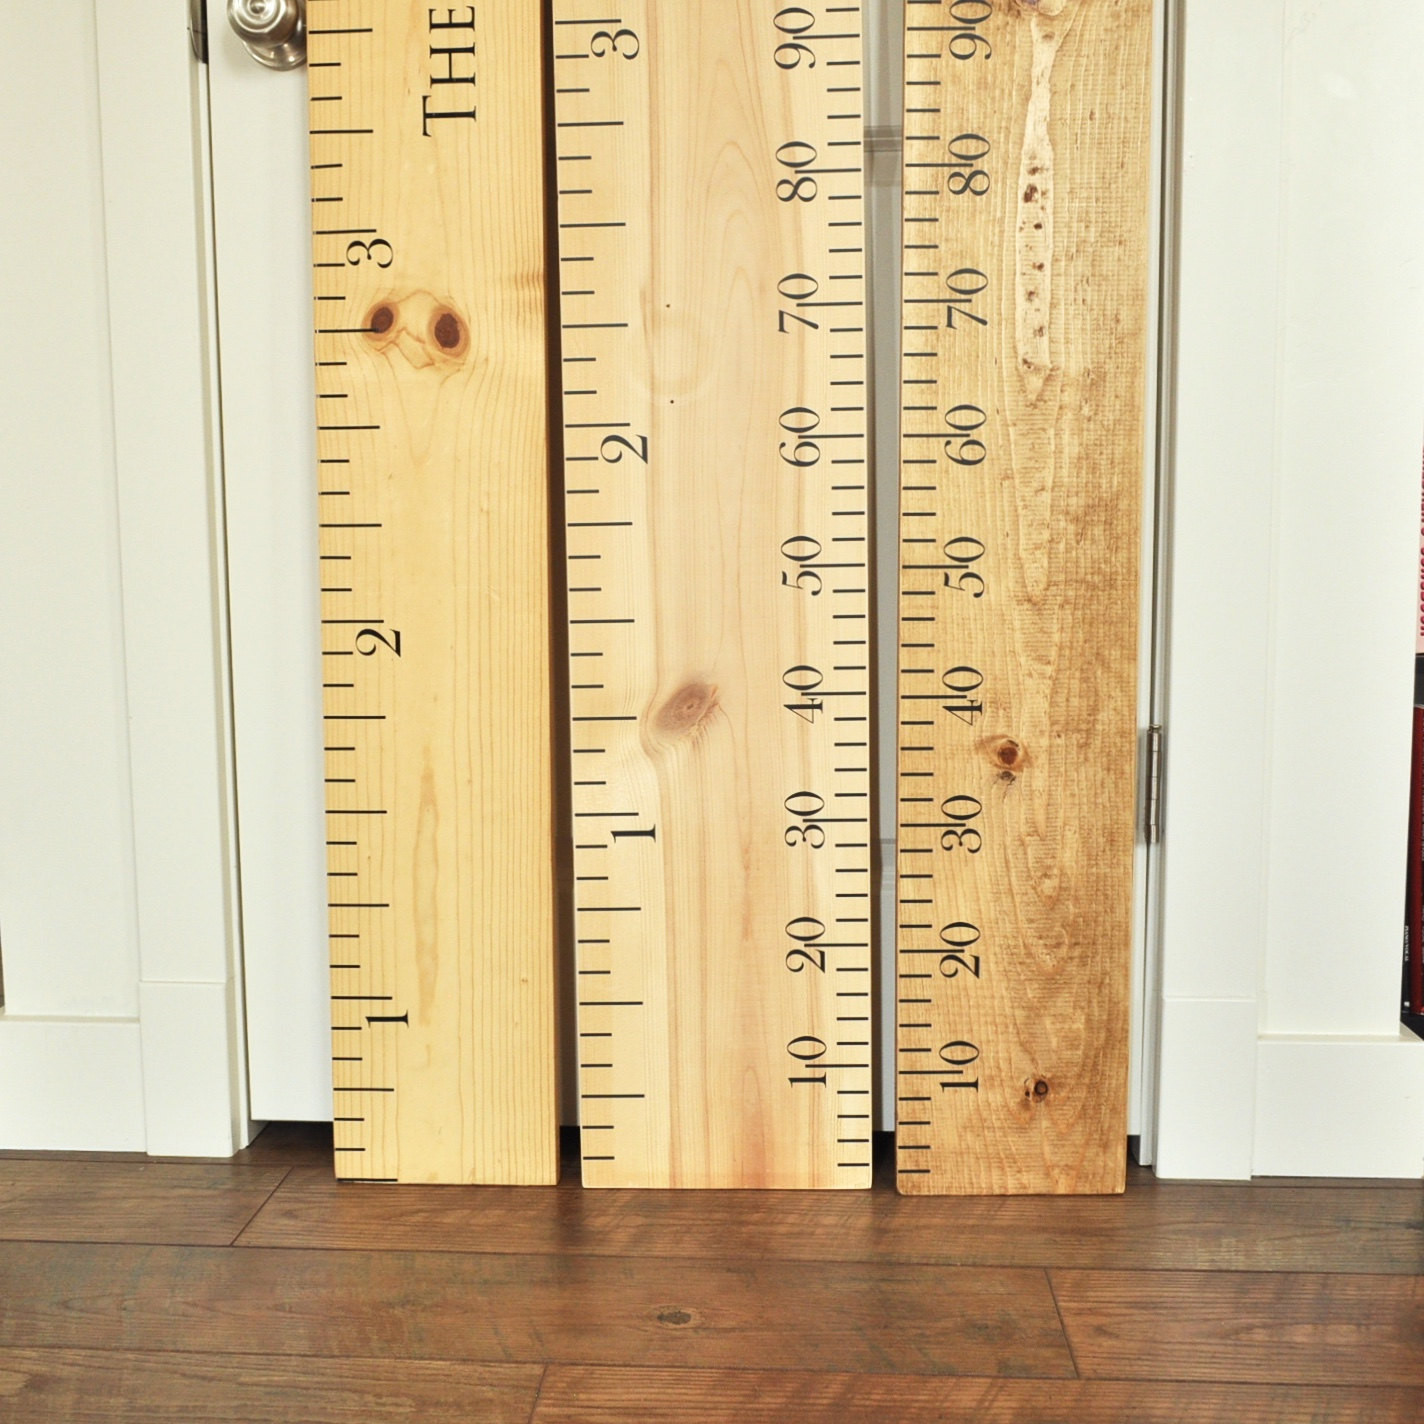 Wooden Ruler Growth Chart DIY
 Ruler Growth Chart Kit DIY Project Oversized Wood Ruler